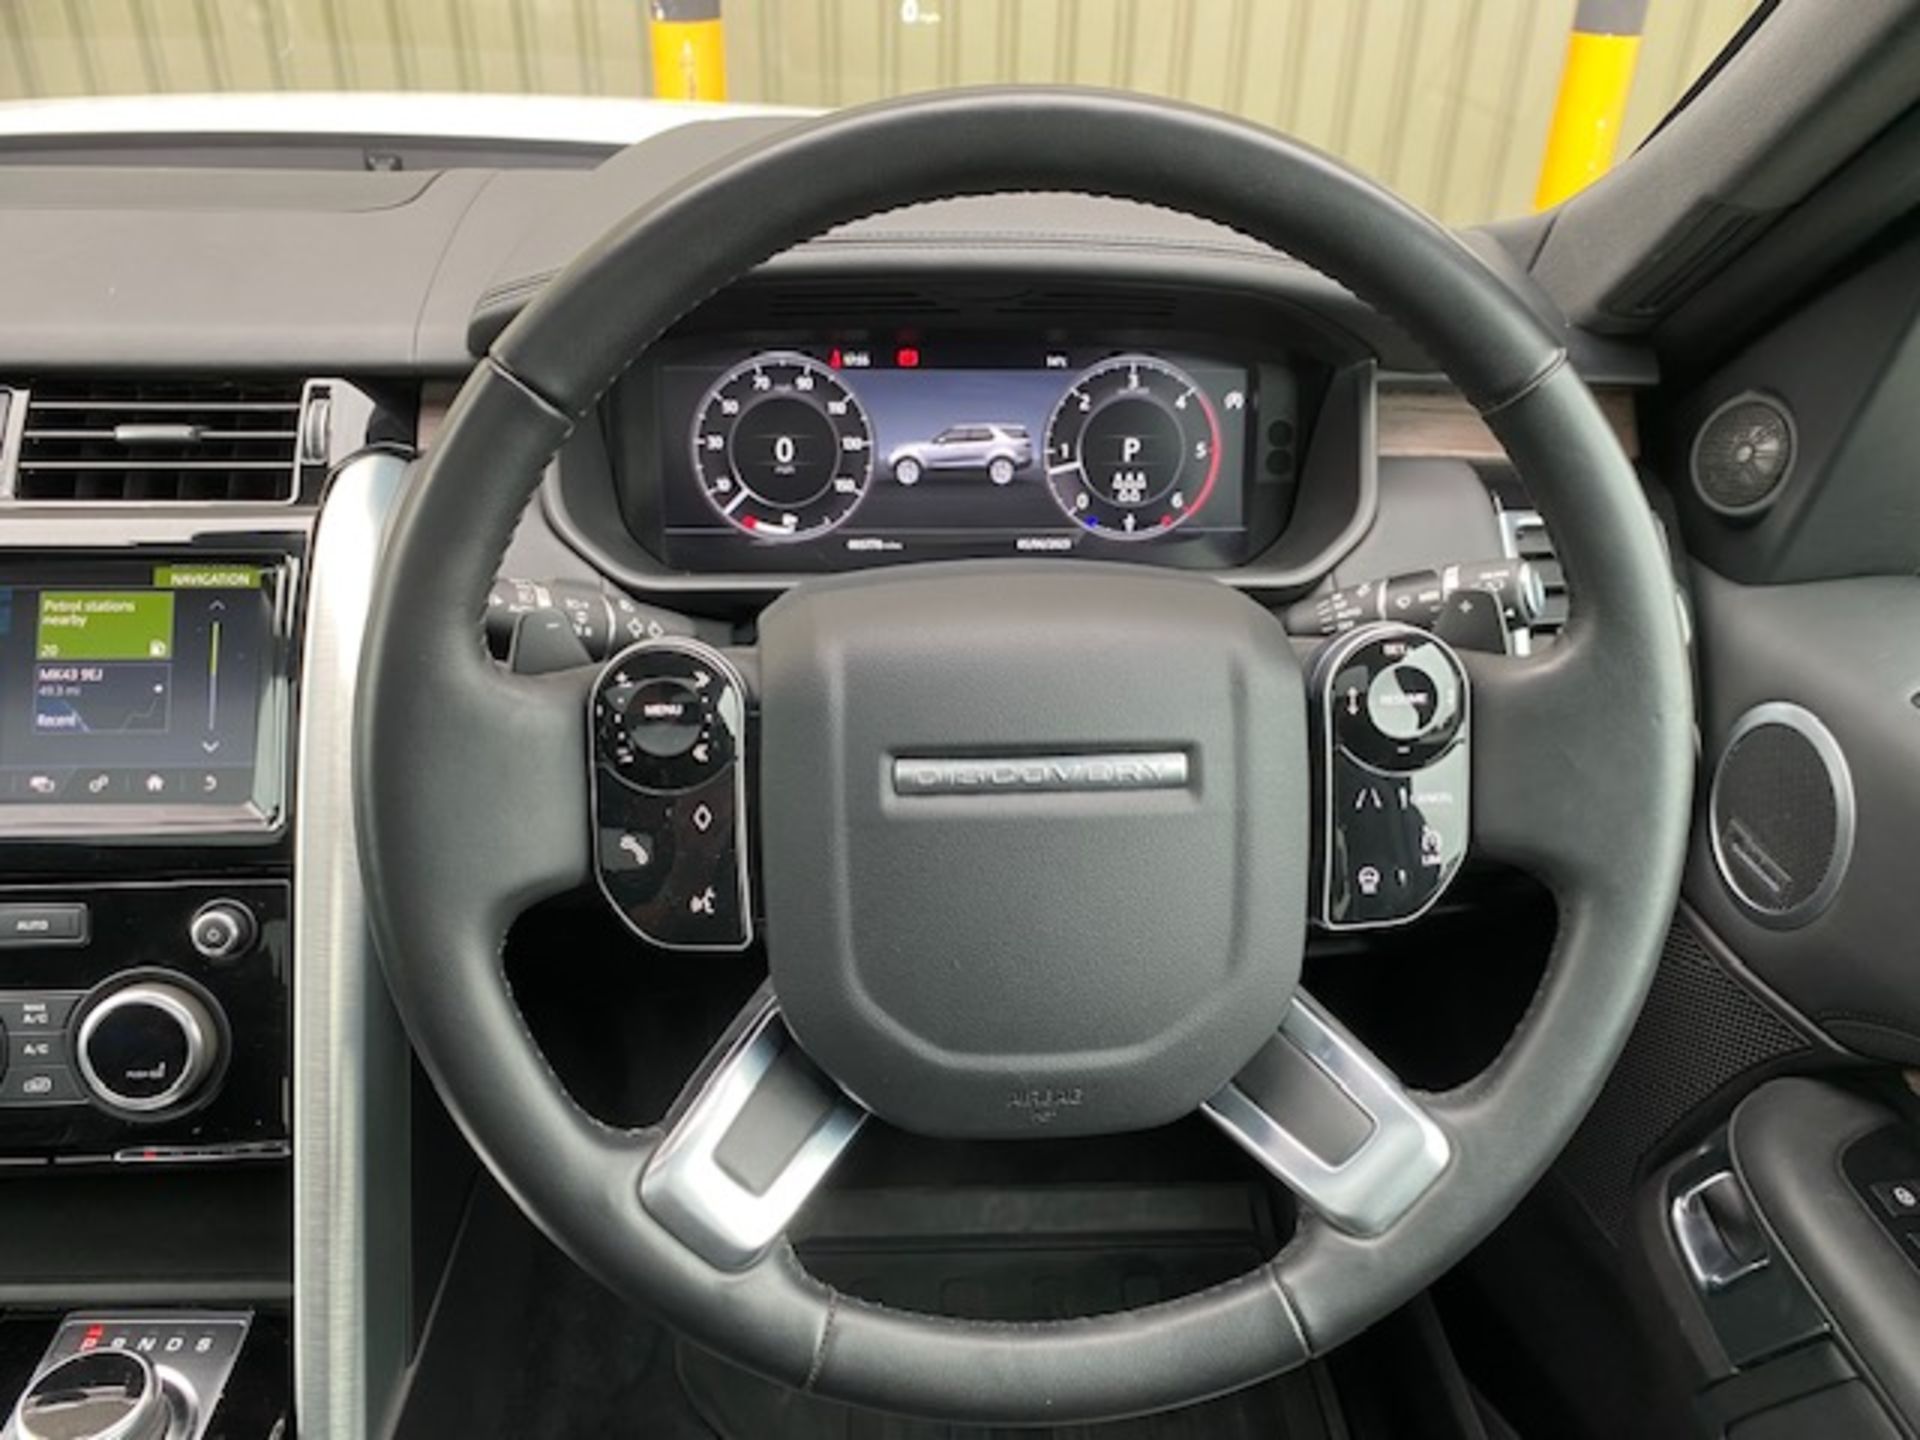 2019 model year Land Rover Discovery 5 3.0 TDV6 HSE Luxury RHD ONLY 5778 MILES! - Bild 15 aus 21